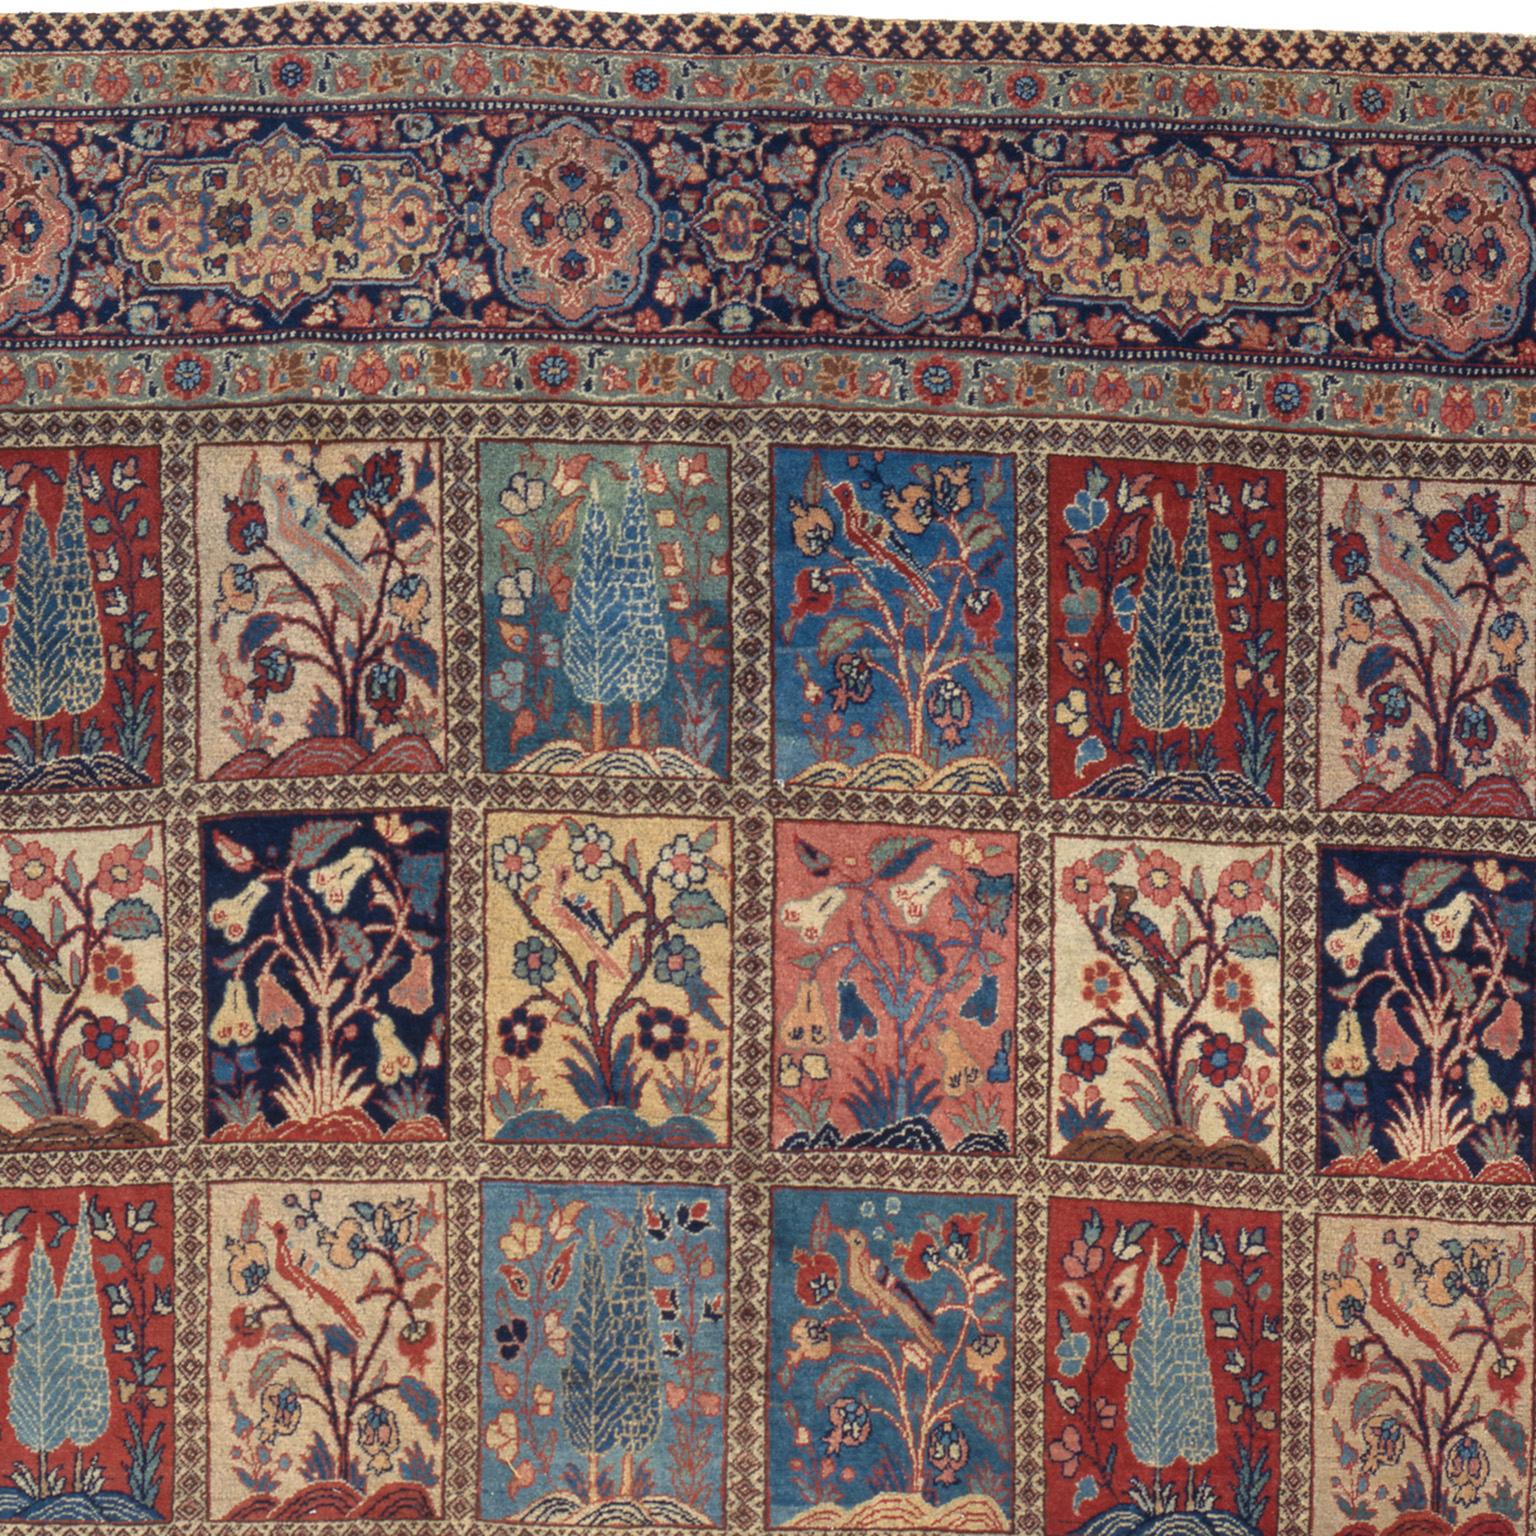 Early 20th Century Persian Tabriz Rug In Good Condition For Sale In New York, NY